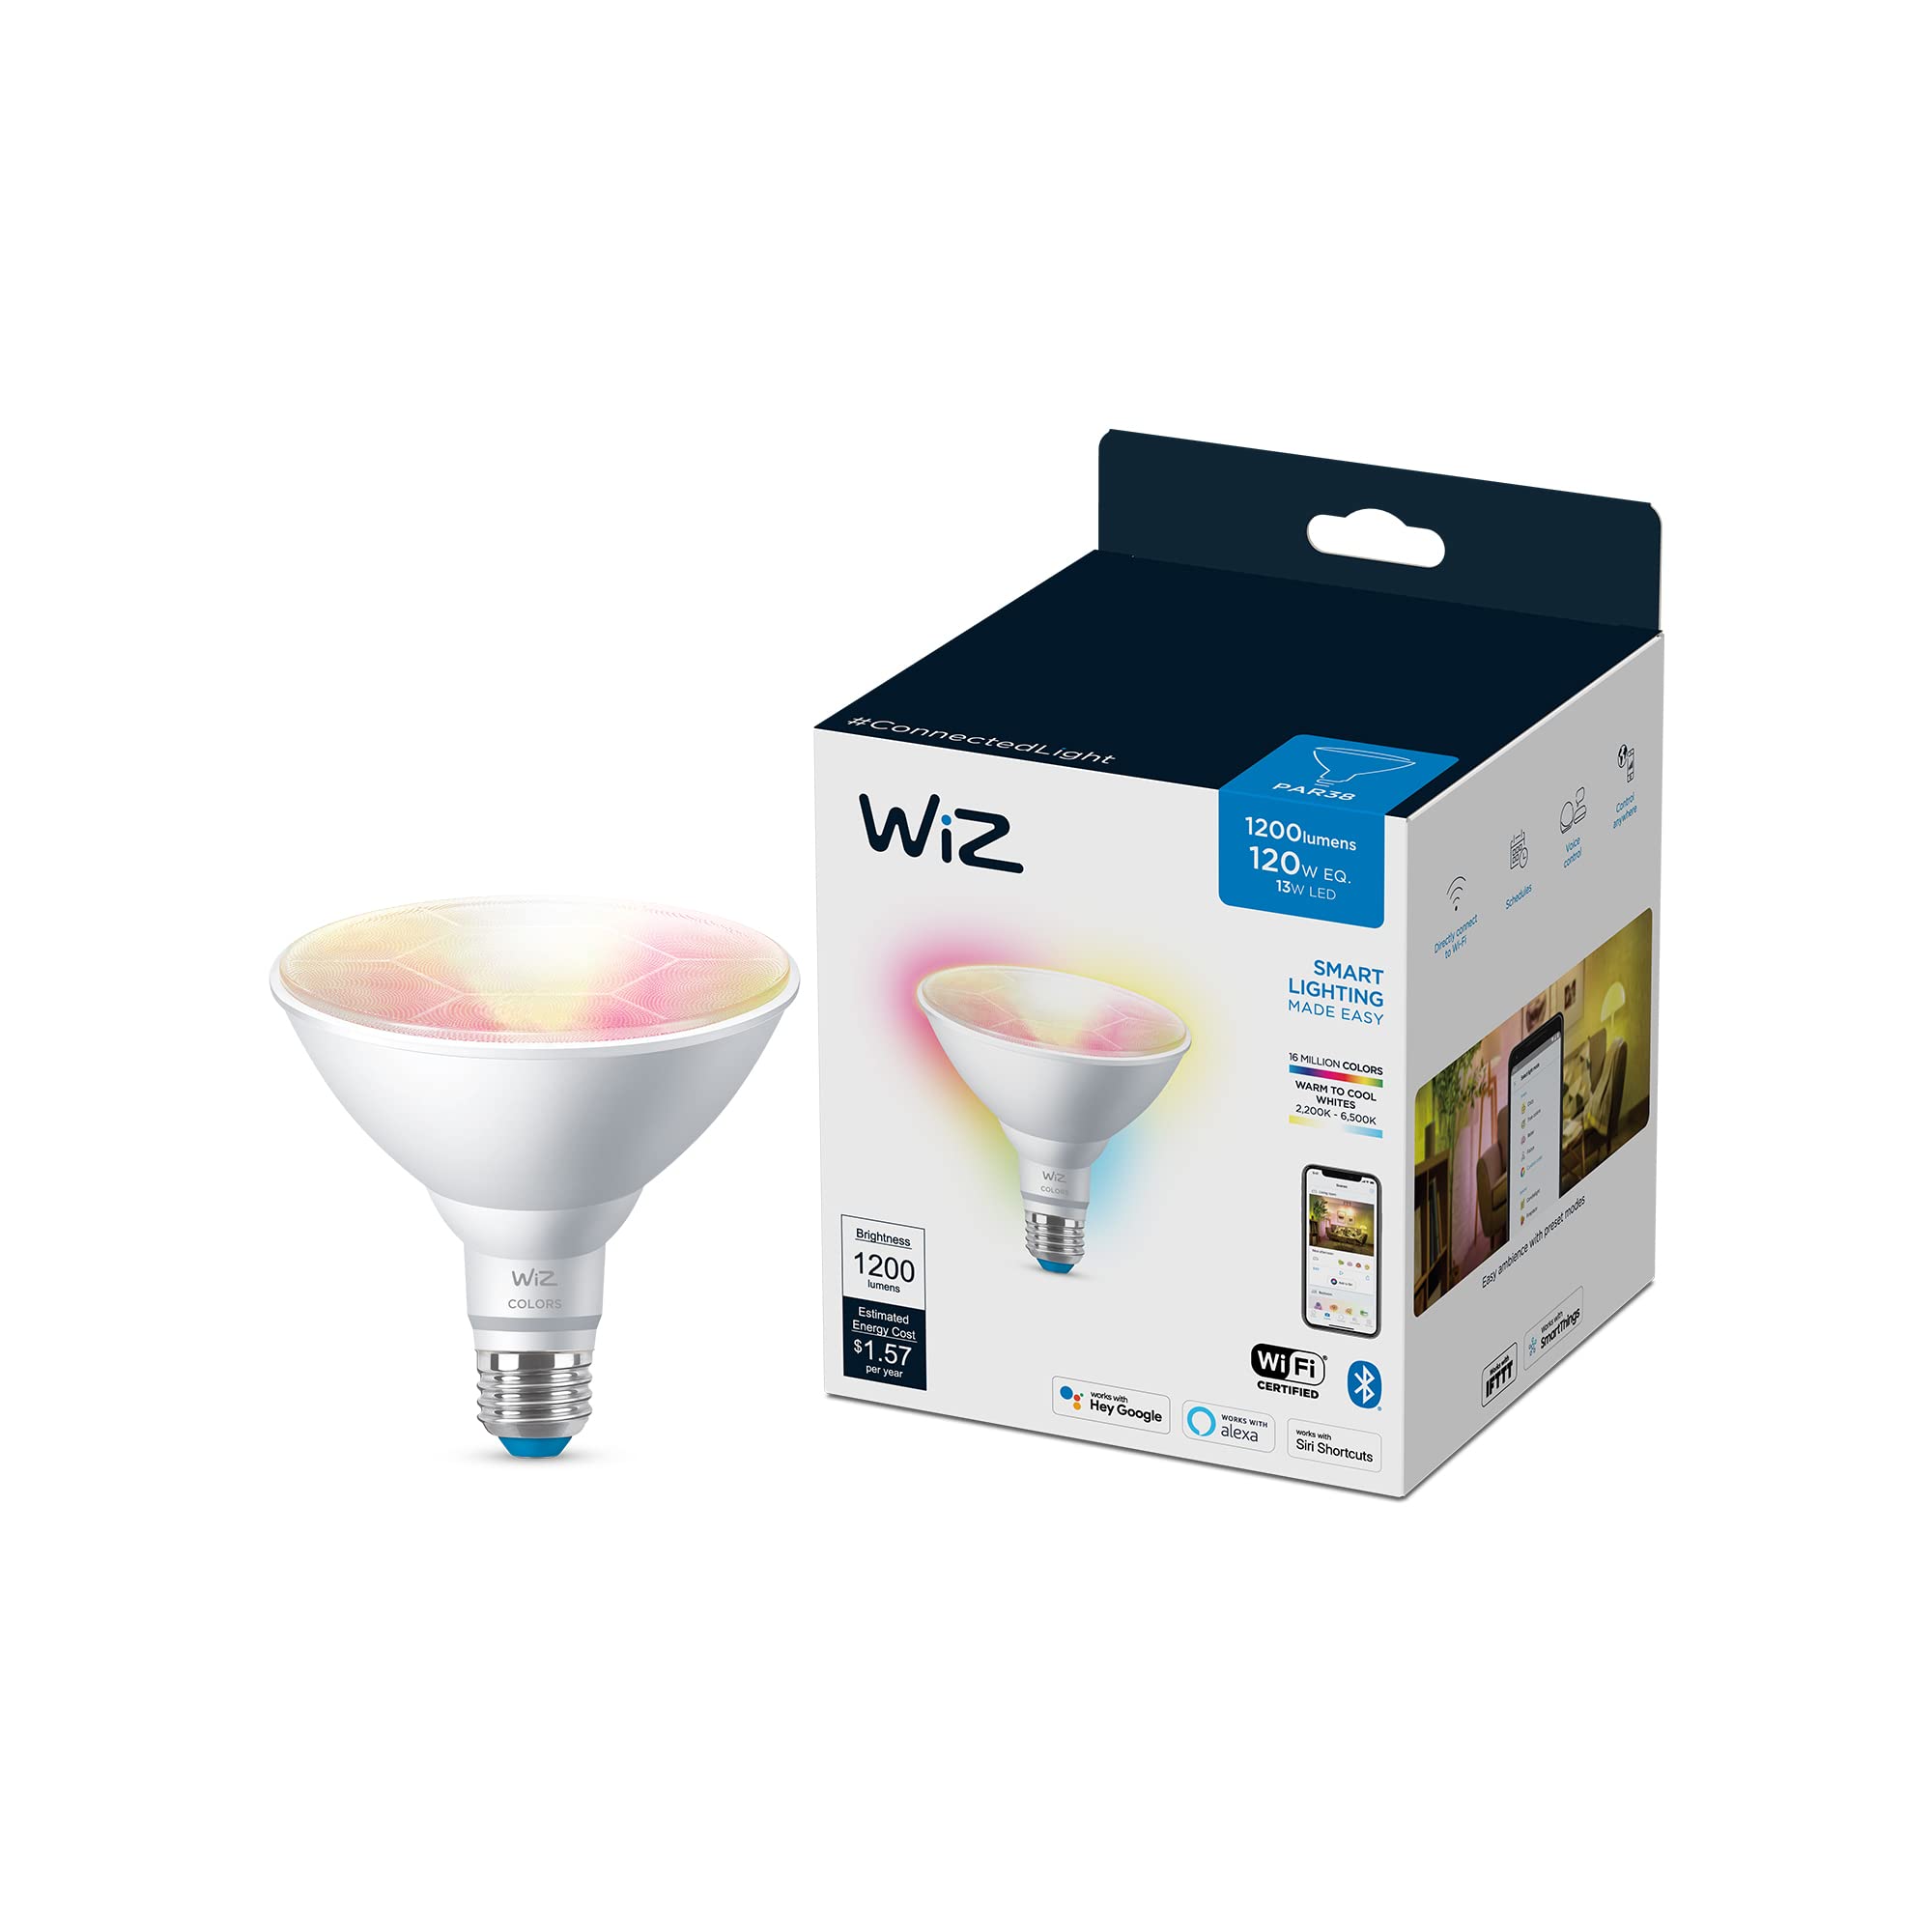 WiZ 120W PAR38 Color LED Smart Bulb - Pack of 1 - E26, Indoor/Outdoor - Connects to Your Existing Wi-Fi - Control with Voice or App - Works with Google Home, Alexa & Siri Shortcuts